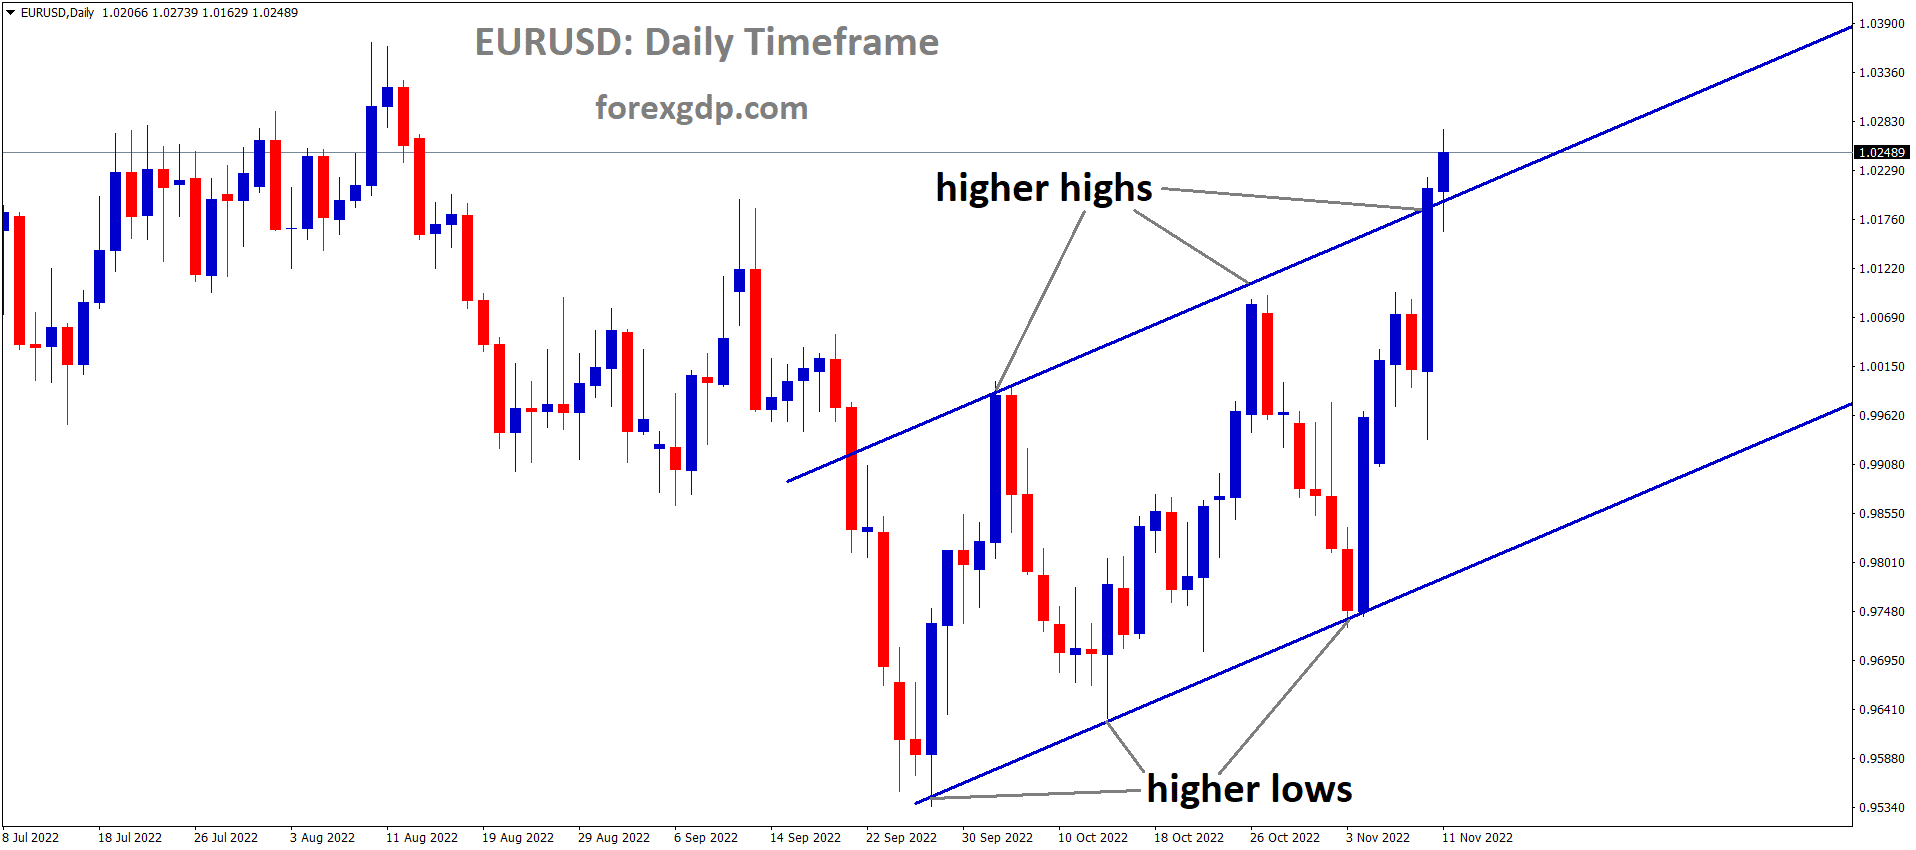 EURUSD is moving in an Ascending channel and the market has reached the higher high area of the channel